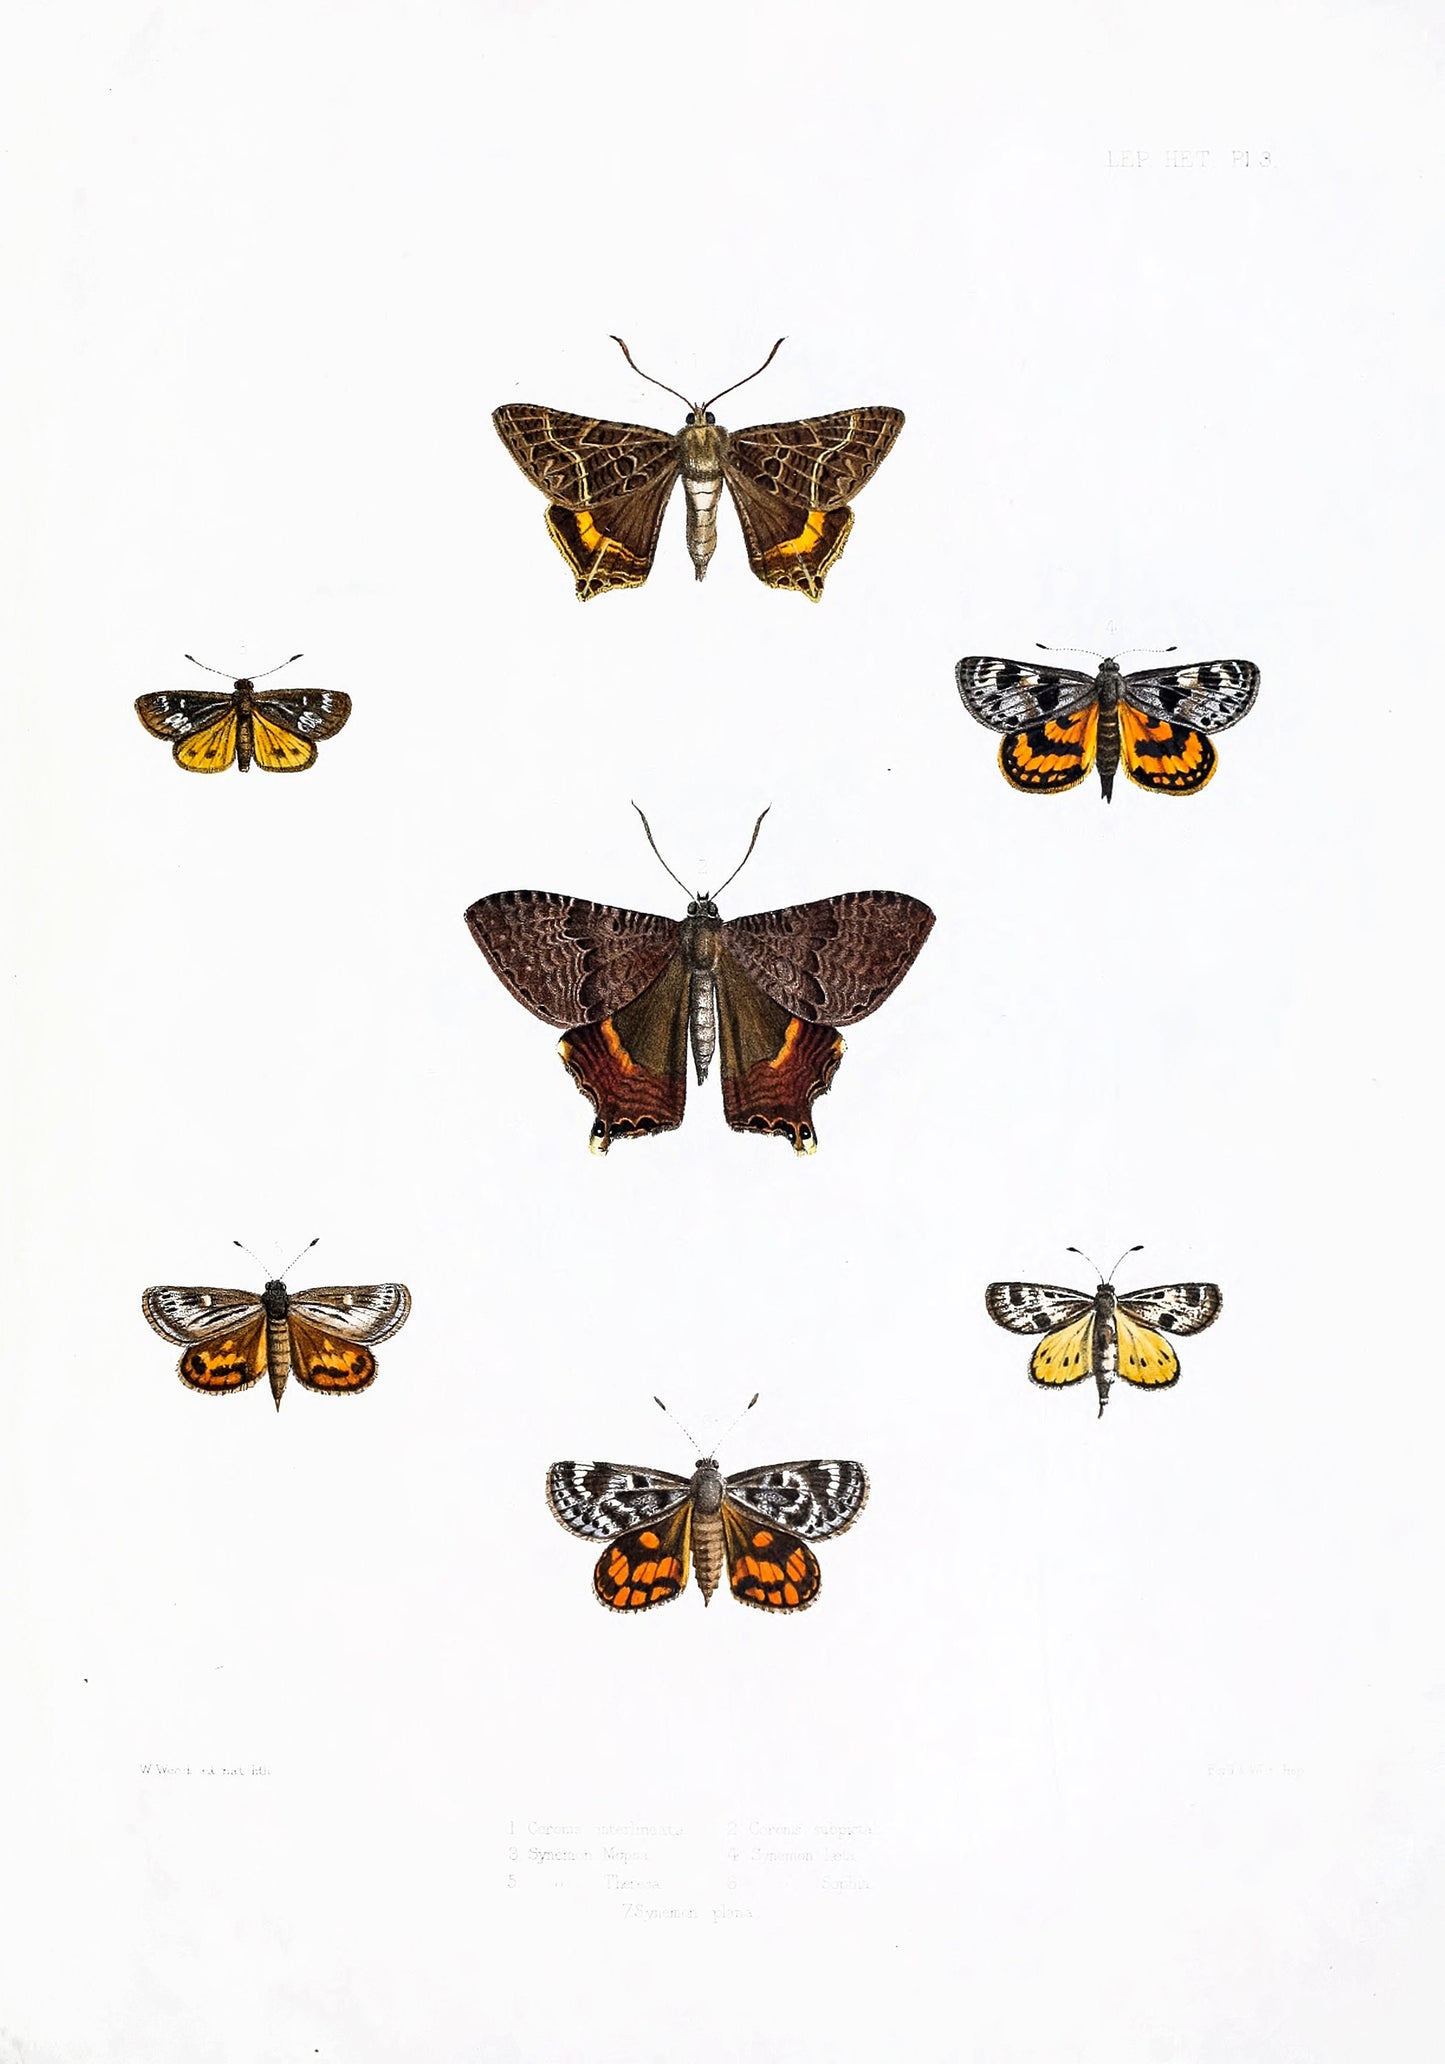 Illustrations of Typical Specimens of Lepidoptera Heterocera [20 Images]